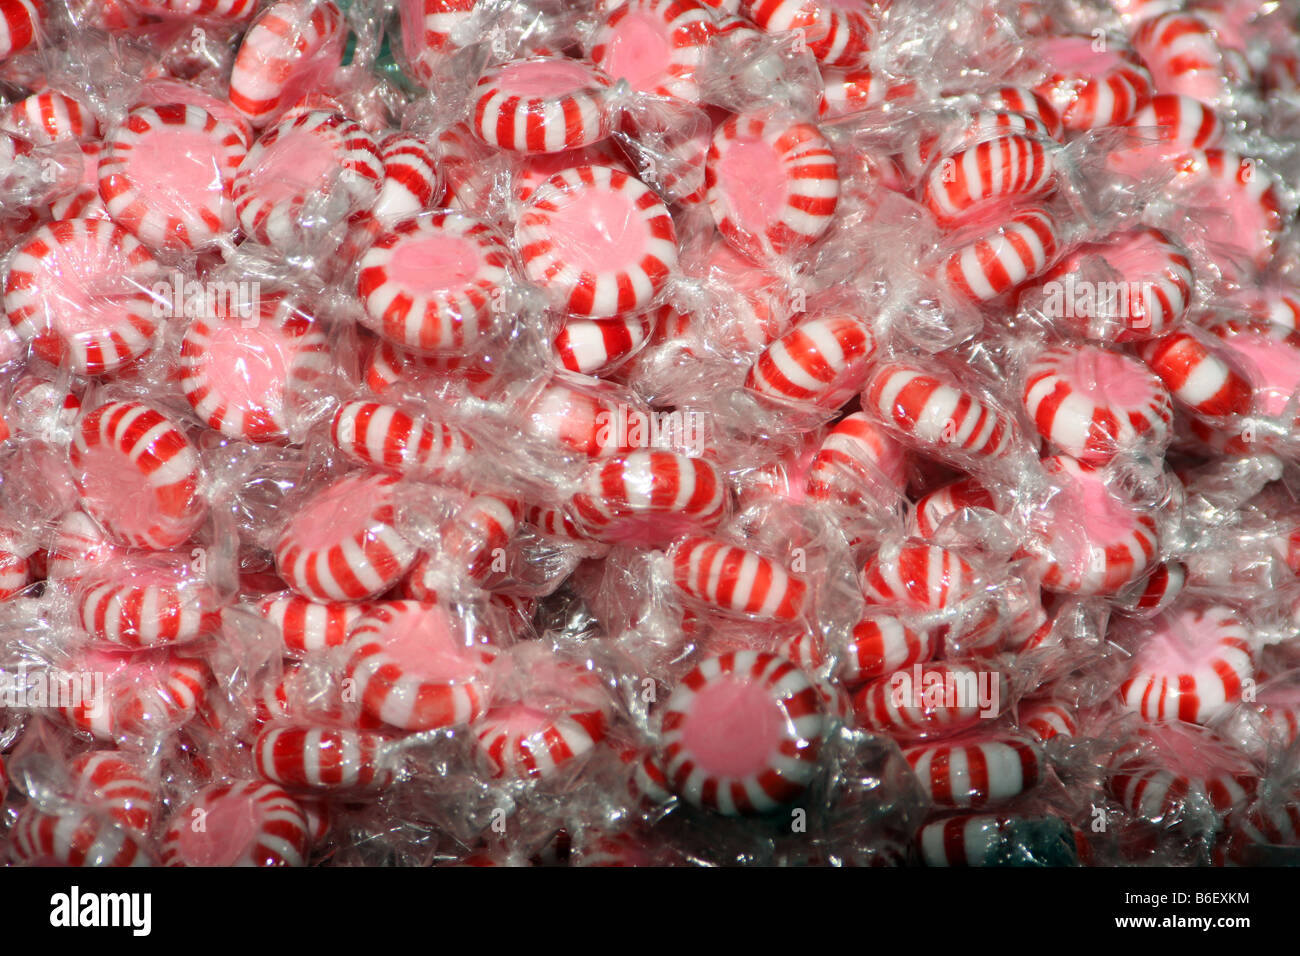 wrapped peppermint candy